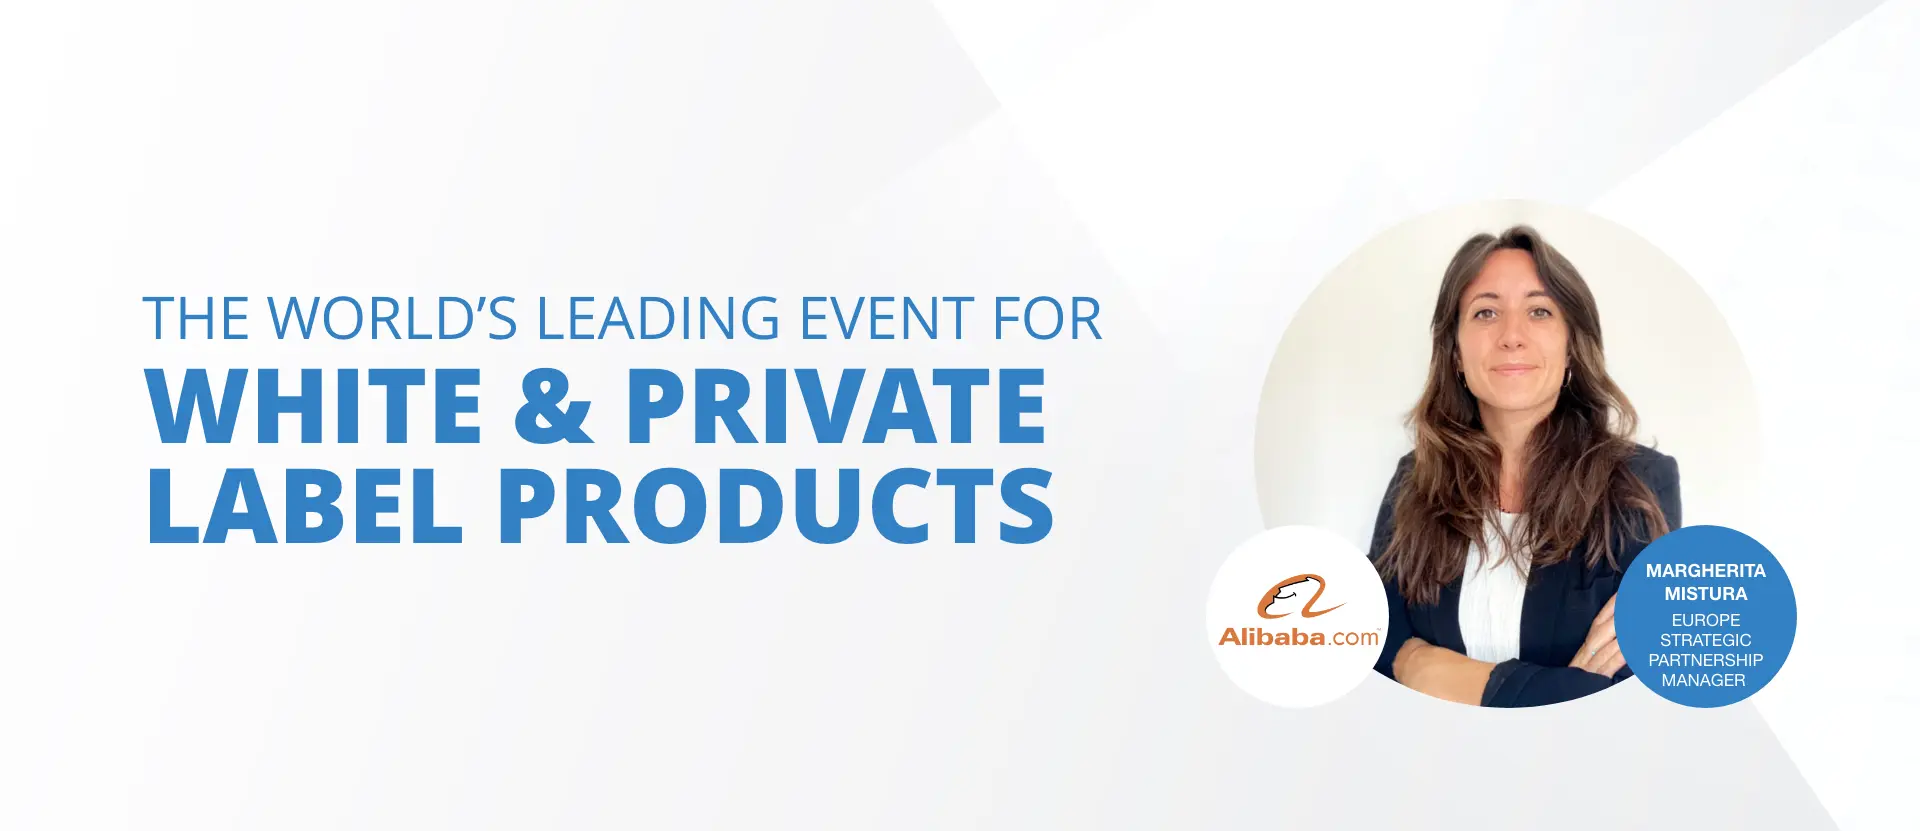 The World's leading event for white & private label product